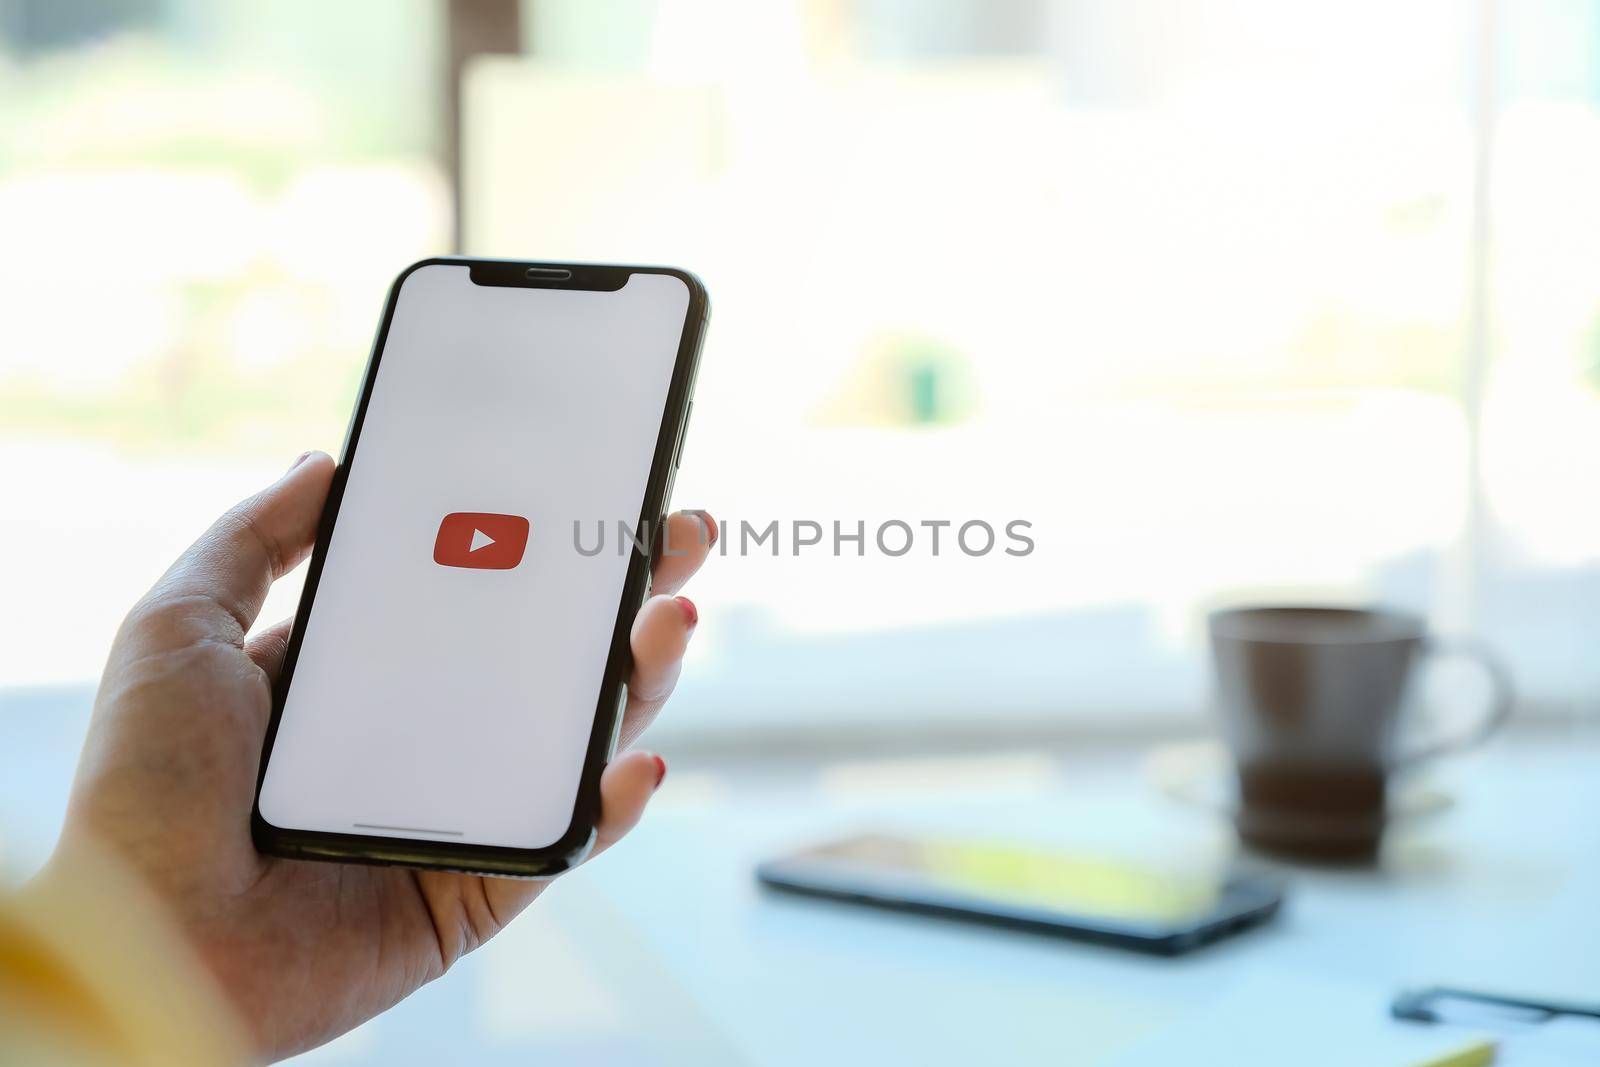 CHIANG MAI, THAILAND - MAR 7 ,2020: Woman holding iPhone Xs with Youtube apps on screen. YouTube is the popular online video sharing website.